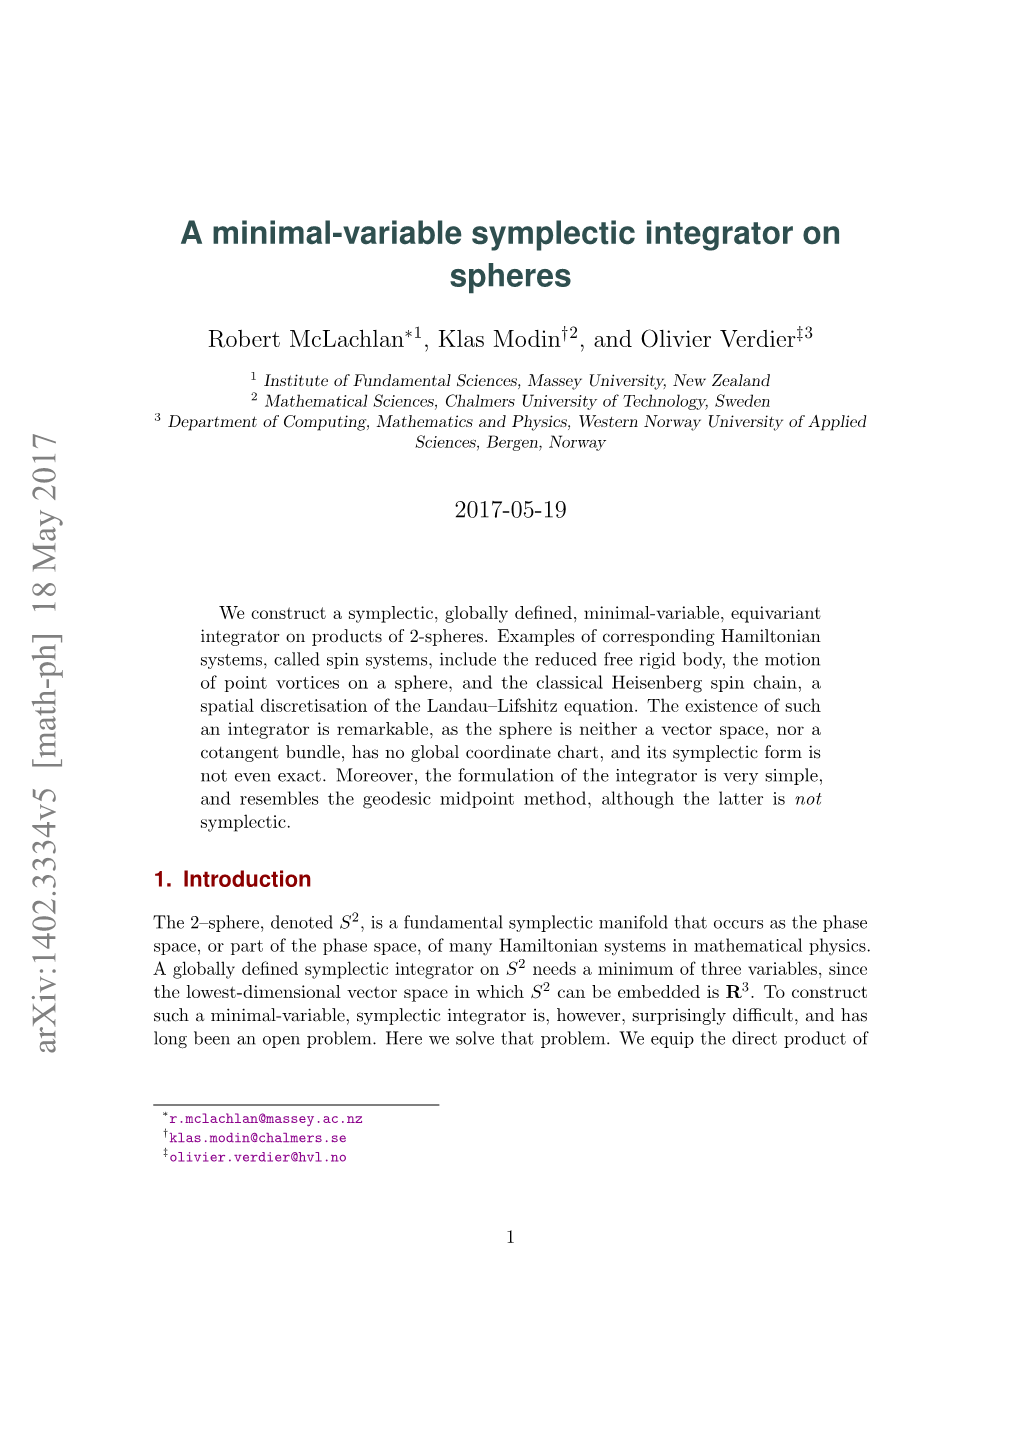 A Minimal-Variable Symplectic Integrator on Spheres